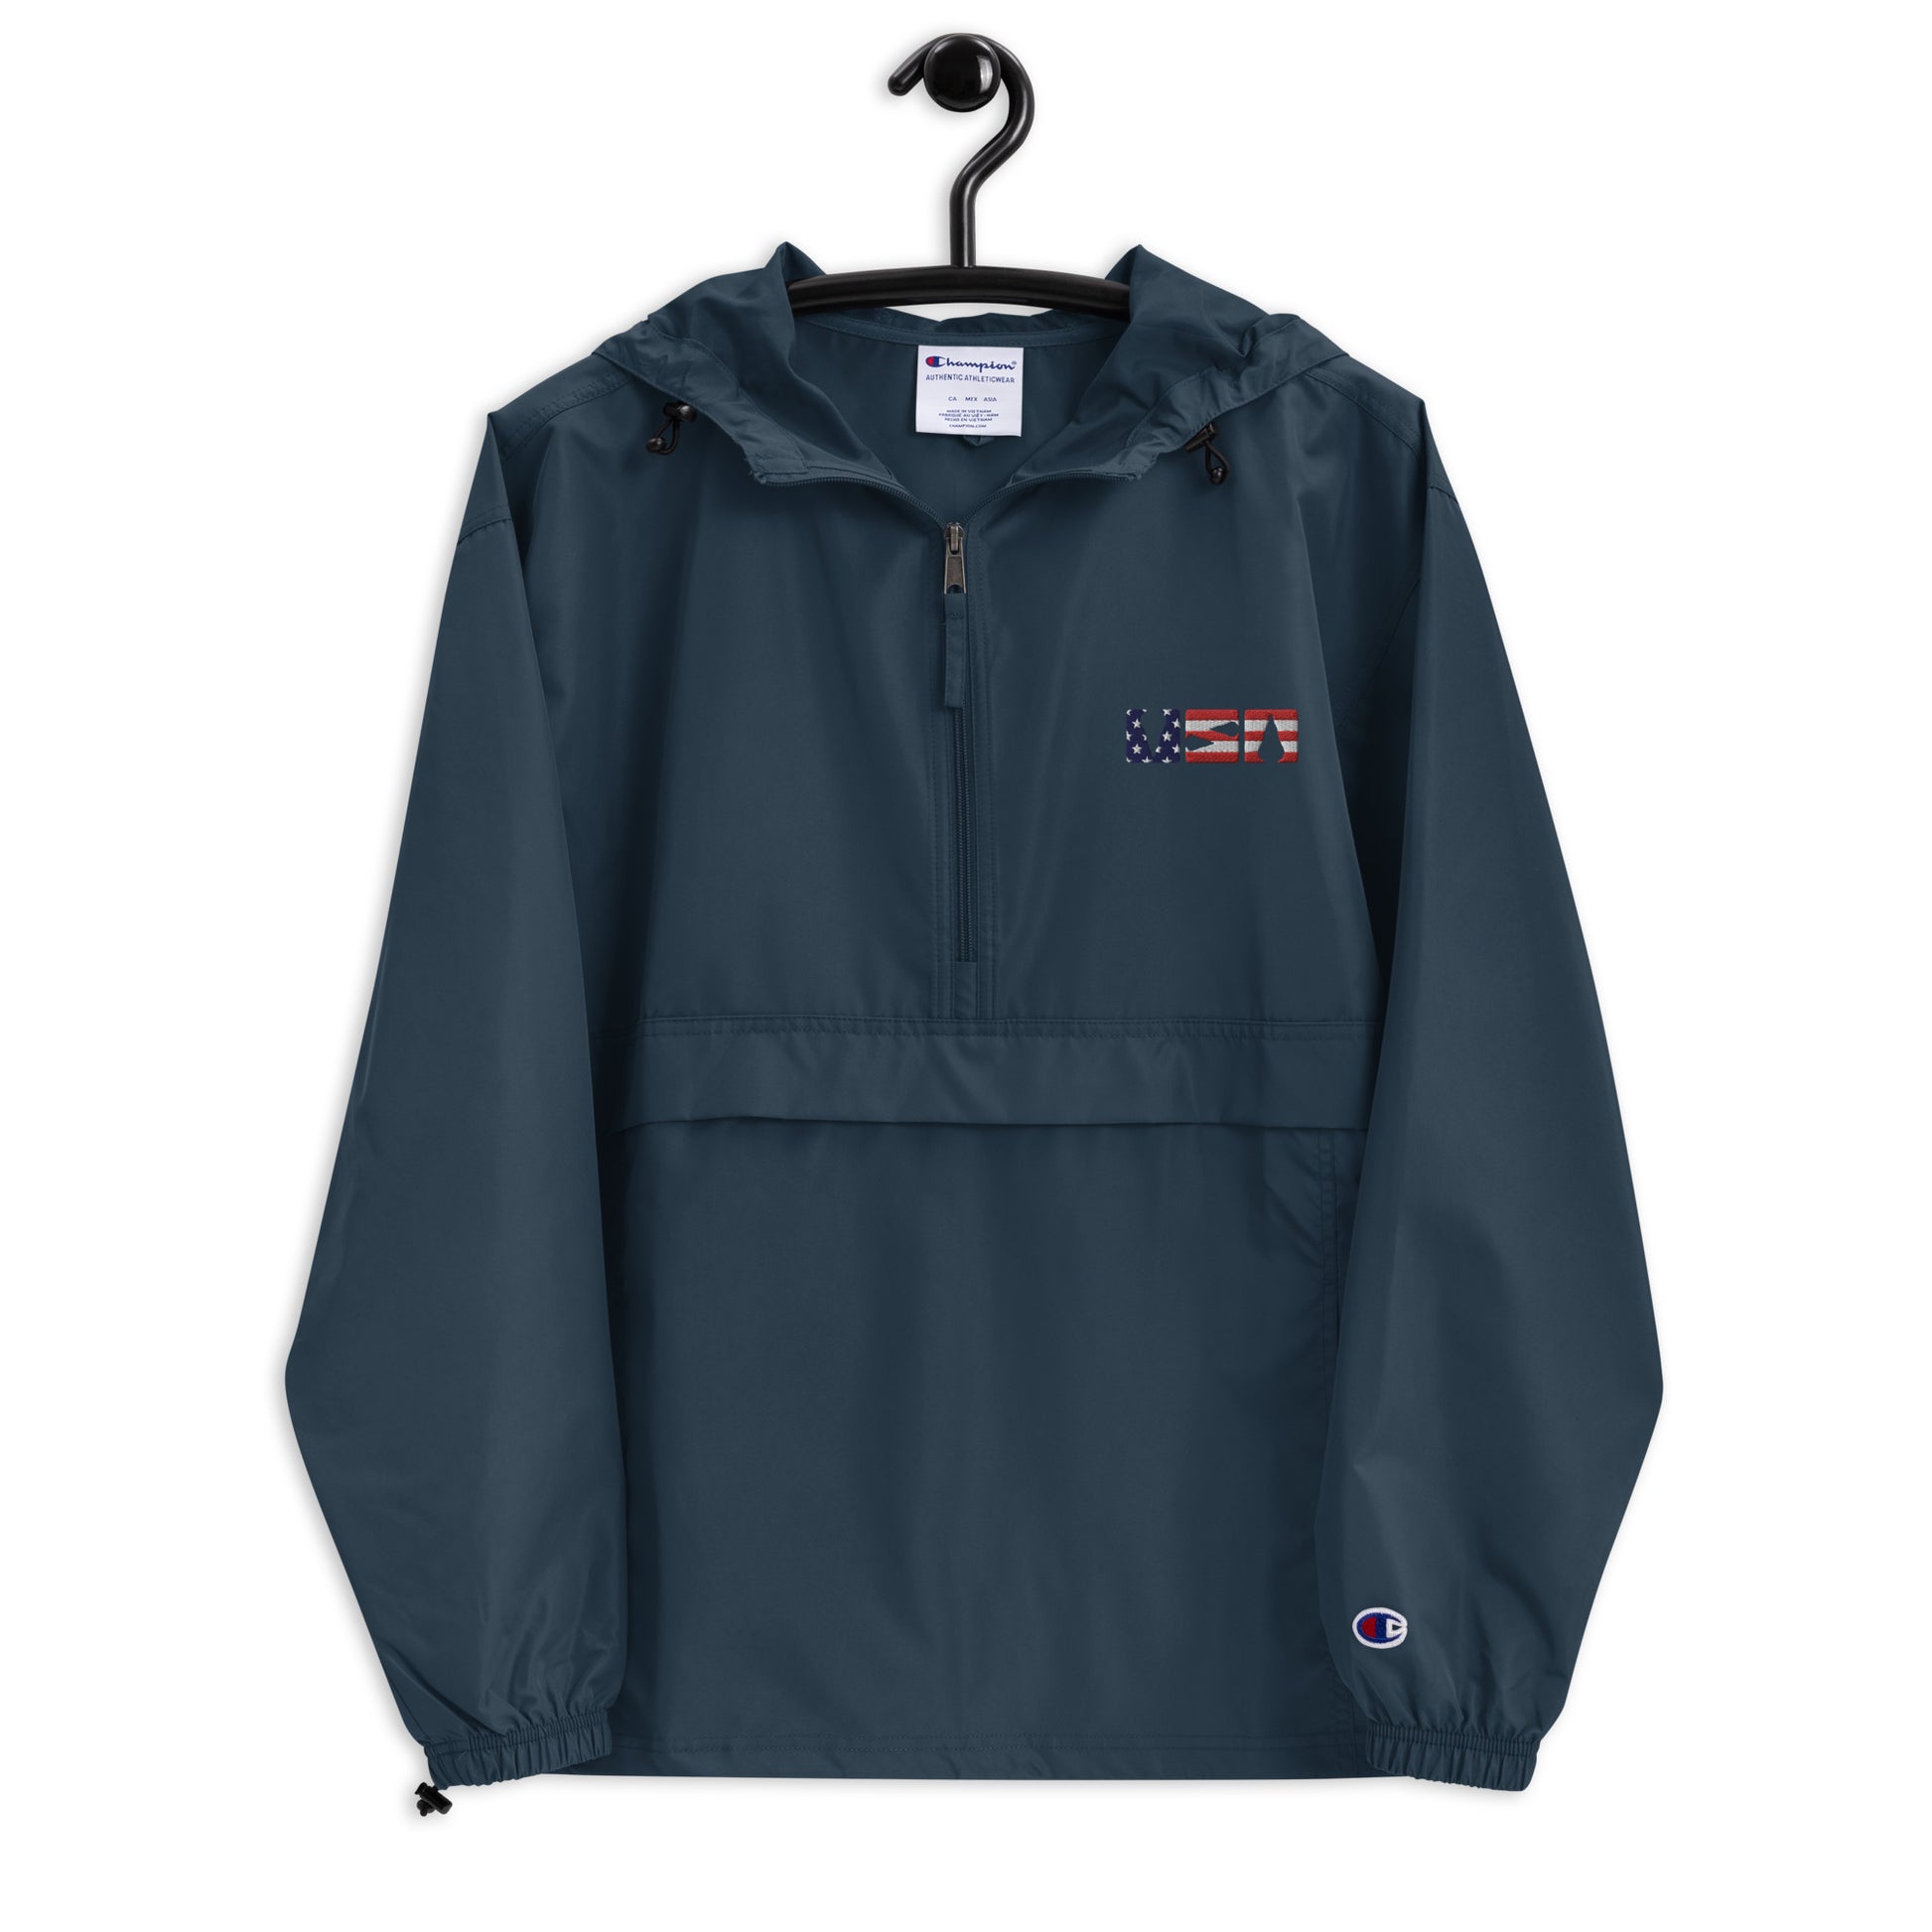 Embroidered USA Champion Lacrosse Jacket Navy